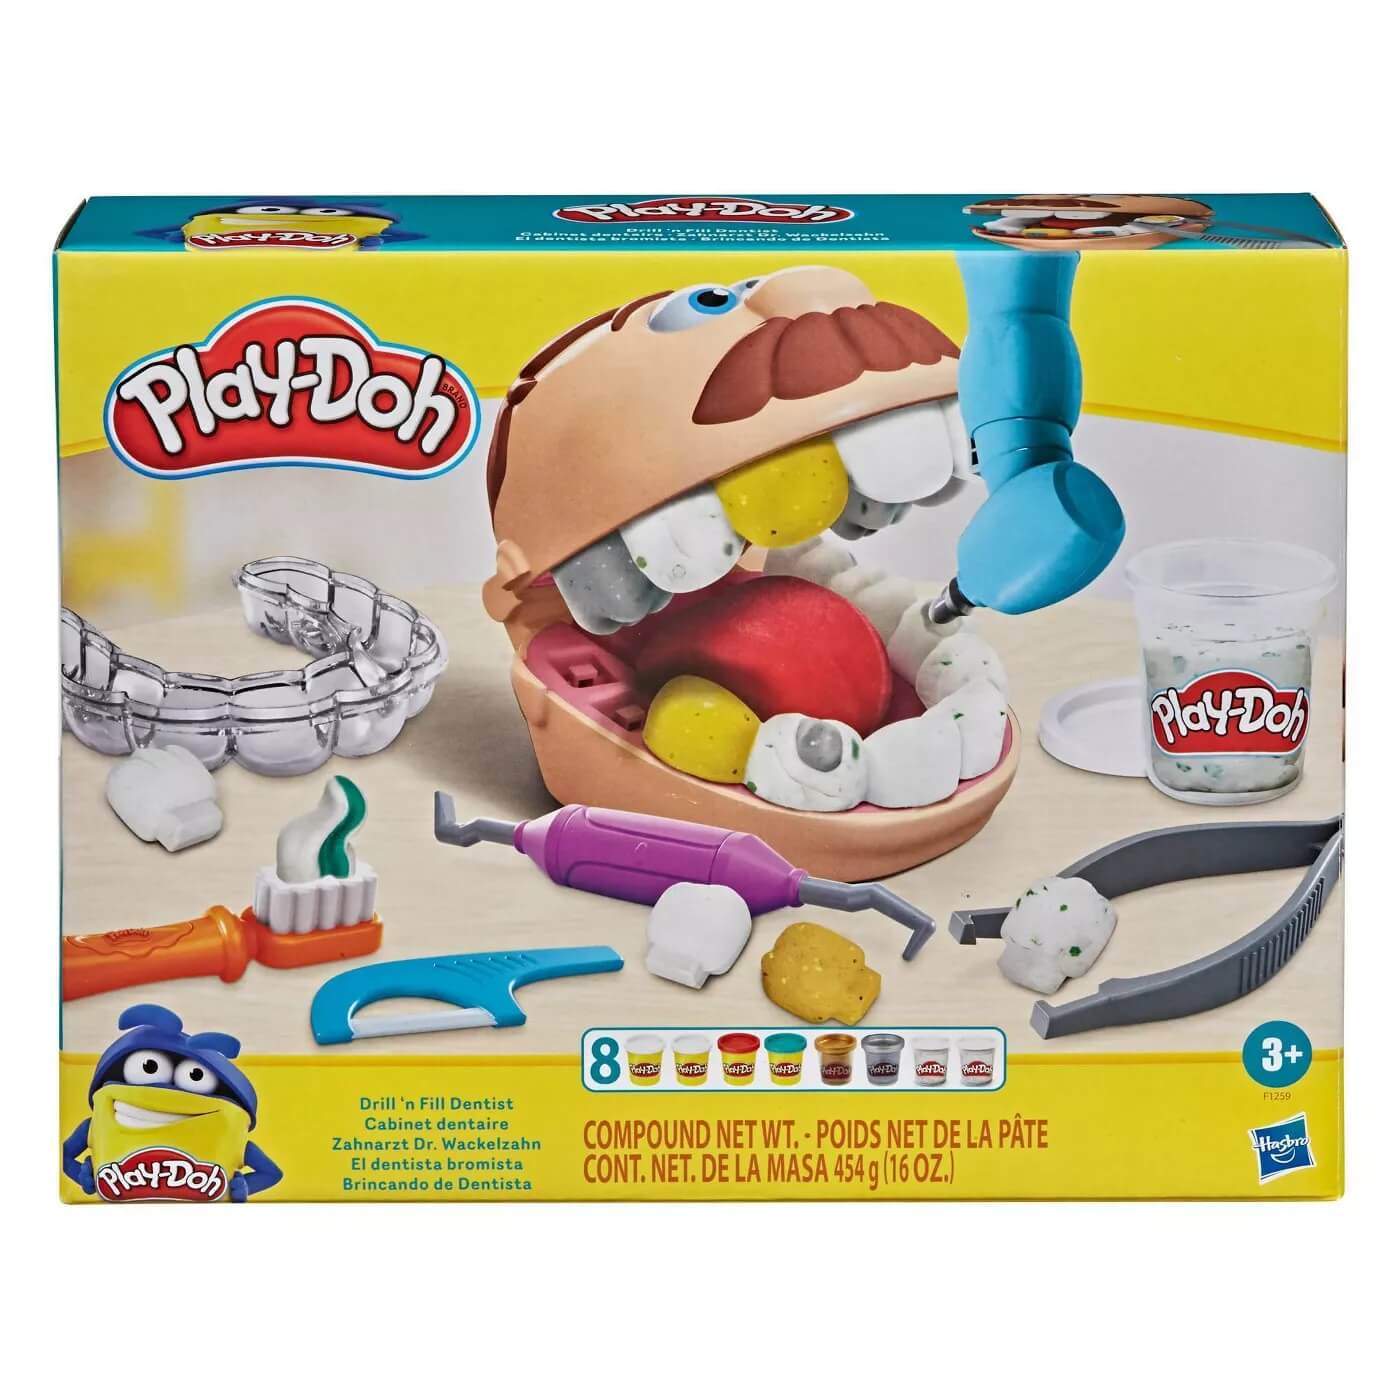 Play-Doh Drill 'n Fill Dentist Modeling Compound Set